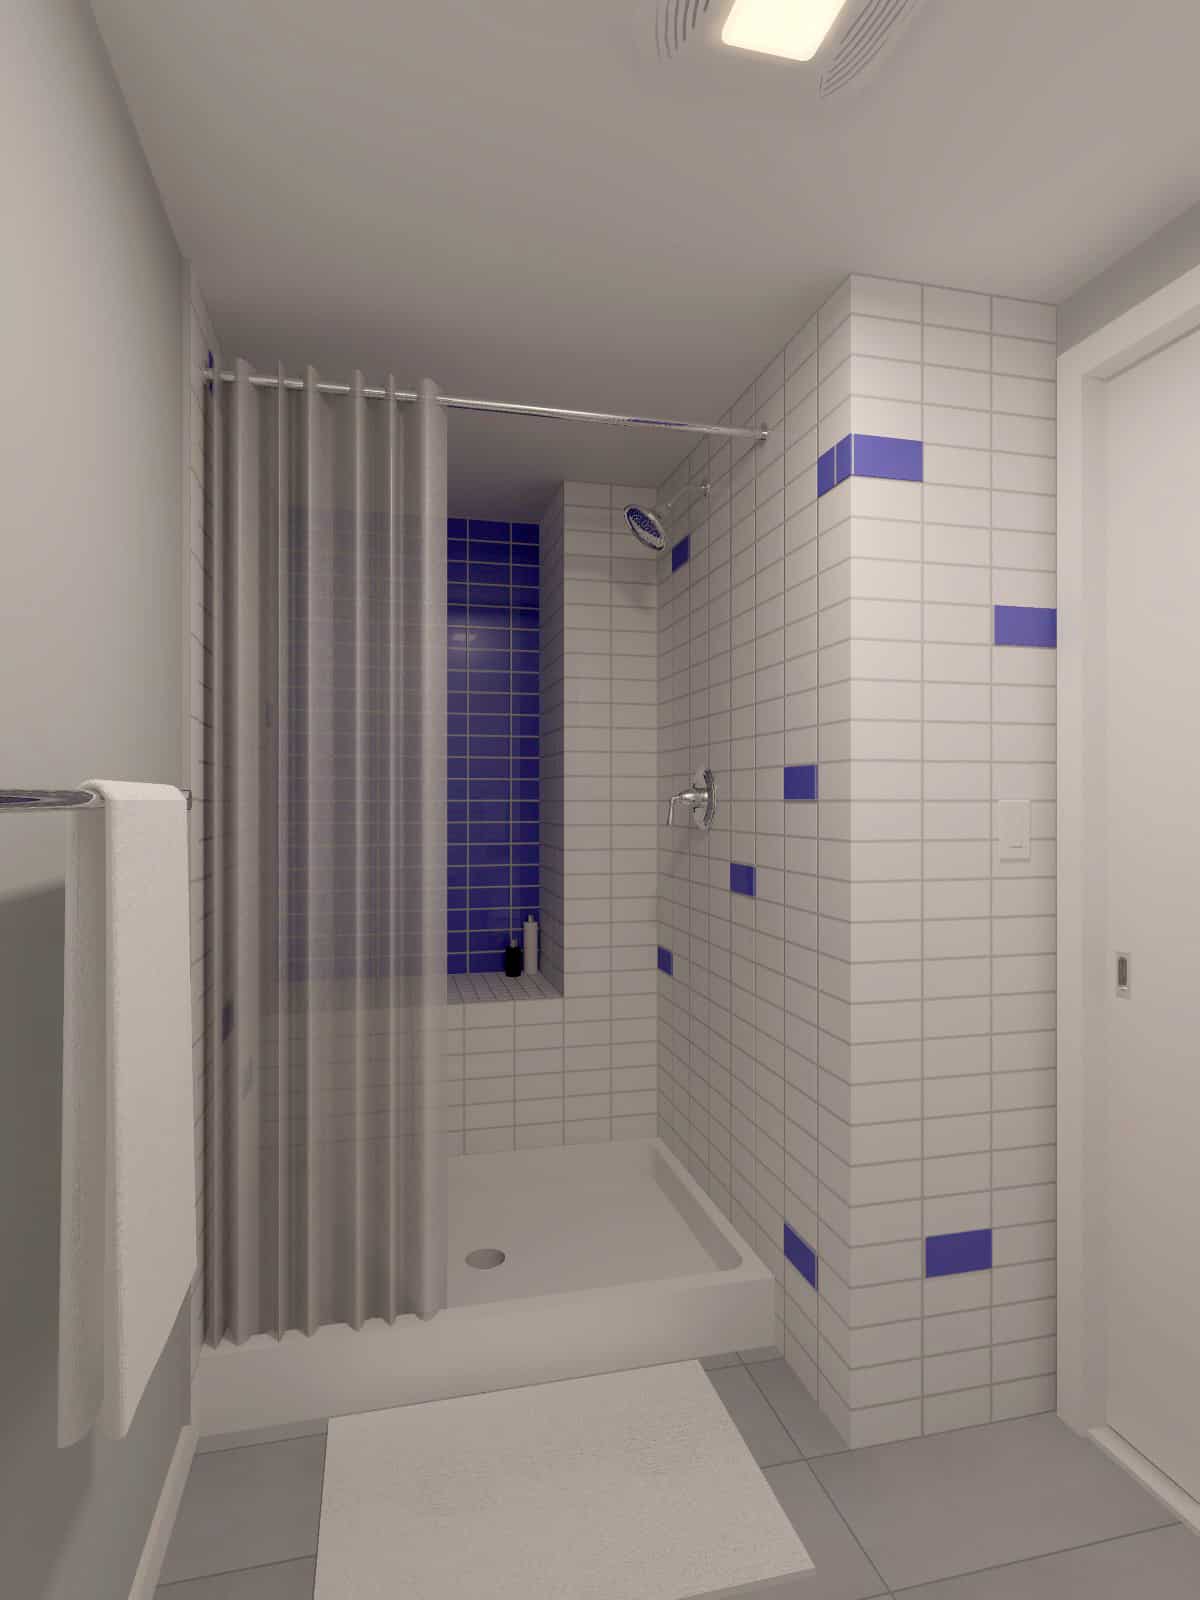 Rendering of a typical bathroom shower